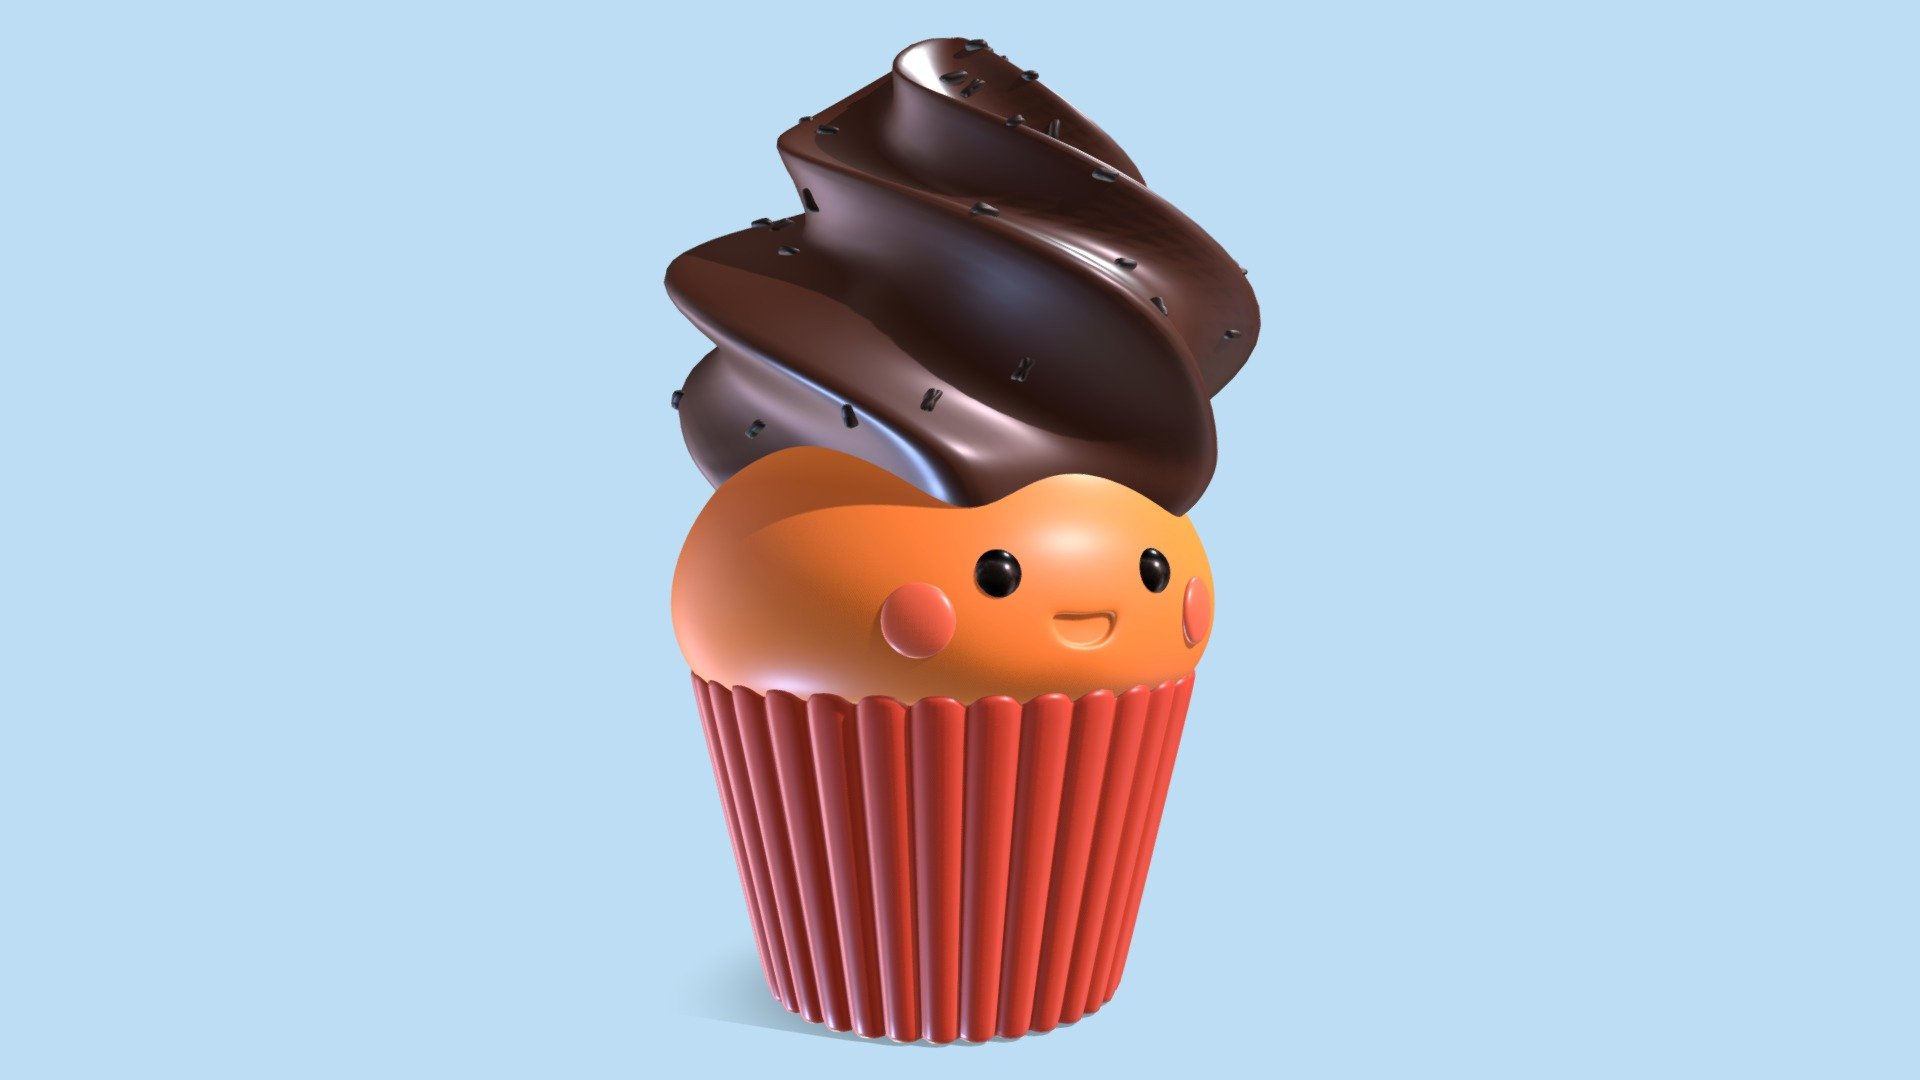 The cutie cupcake low-poly character&hellip; ♥




The first object I modeled in blender.

No textures, only materials.

If you like this model please support me and check my other models☺♥

My portfolio►https://www.artstation.com/iclartworks

My insta►https://www.instagram.com/iclartworks/ - Cutie Cupcake - Download Free 3D model by iclartworks 3d model